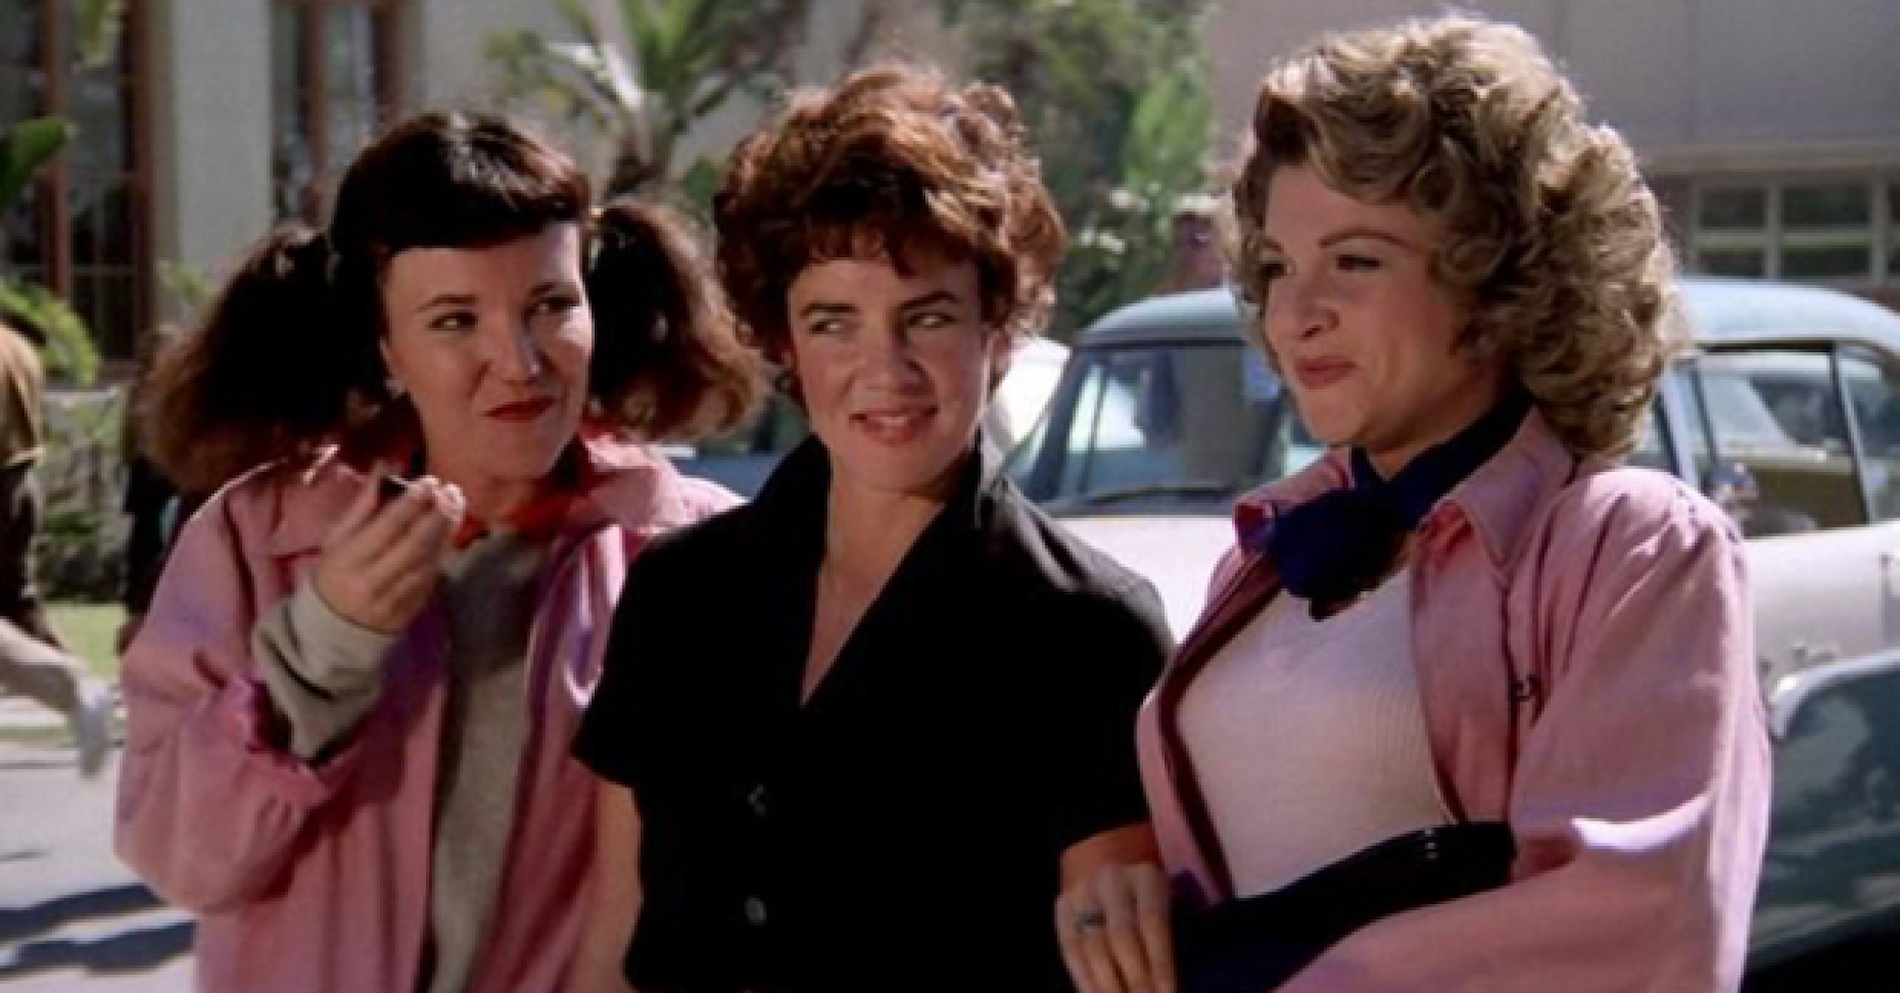 Grease: Rise of the Pink Ladies - Stream: online anschauen